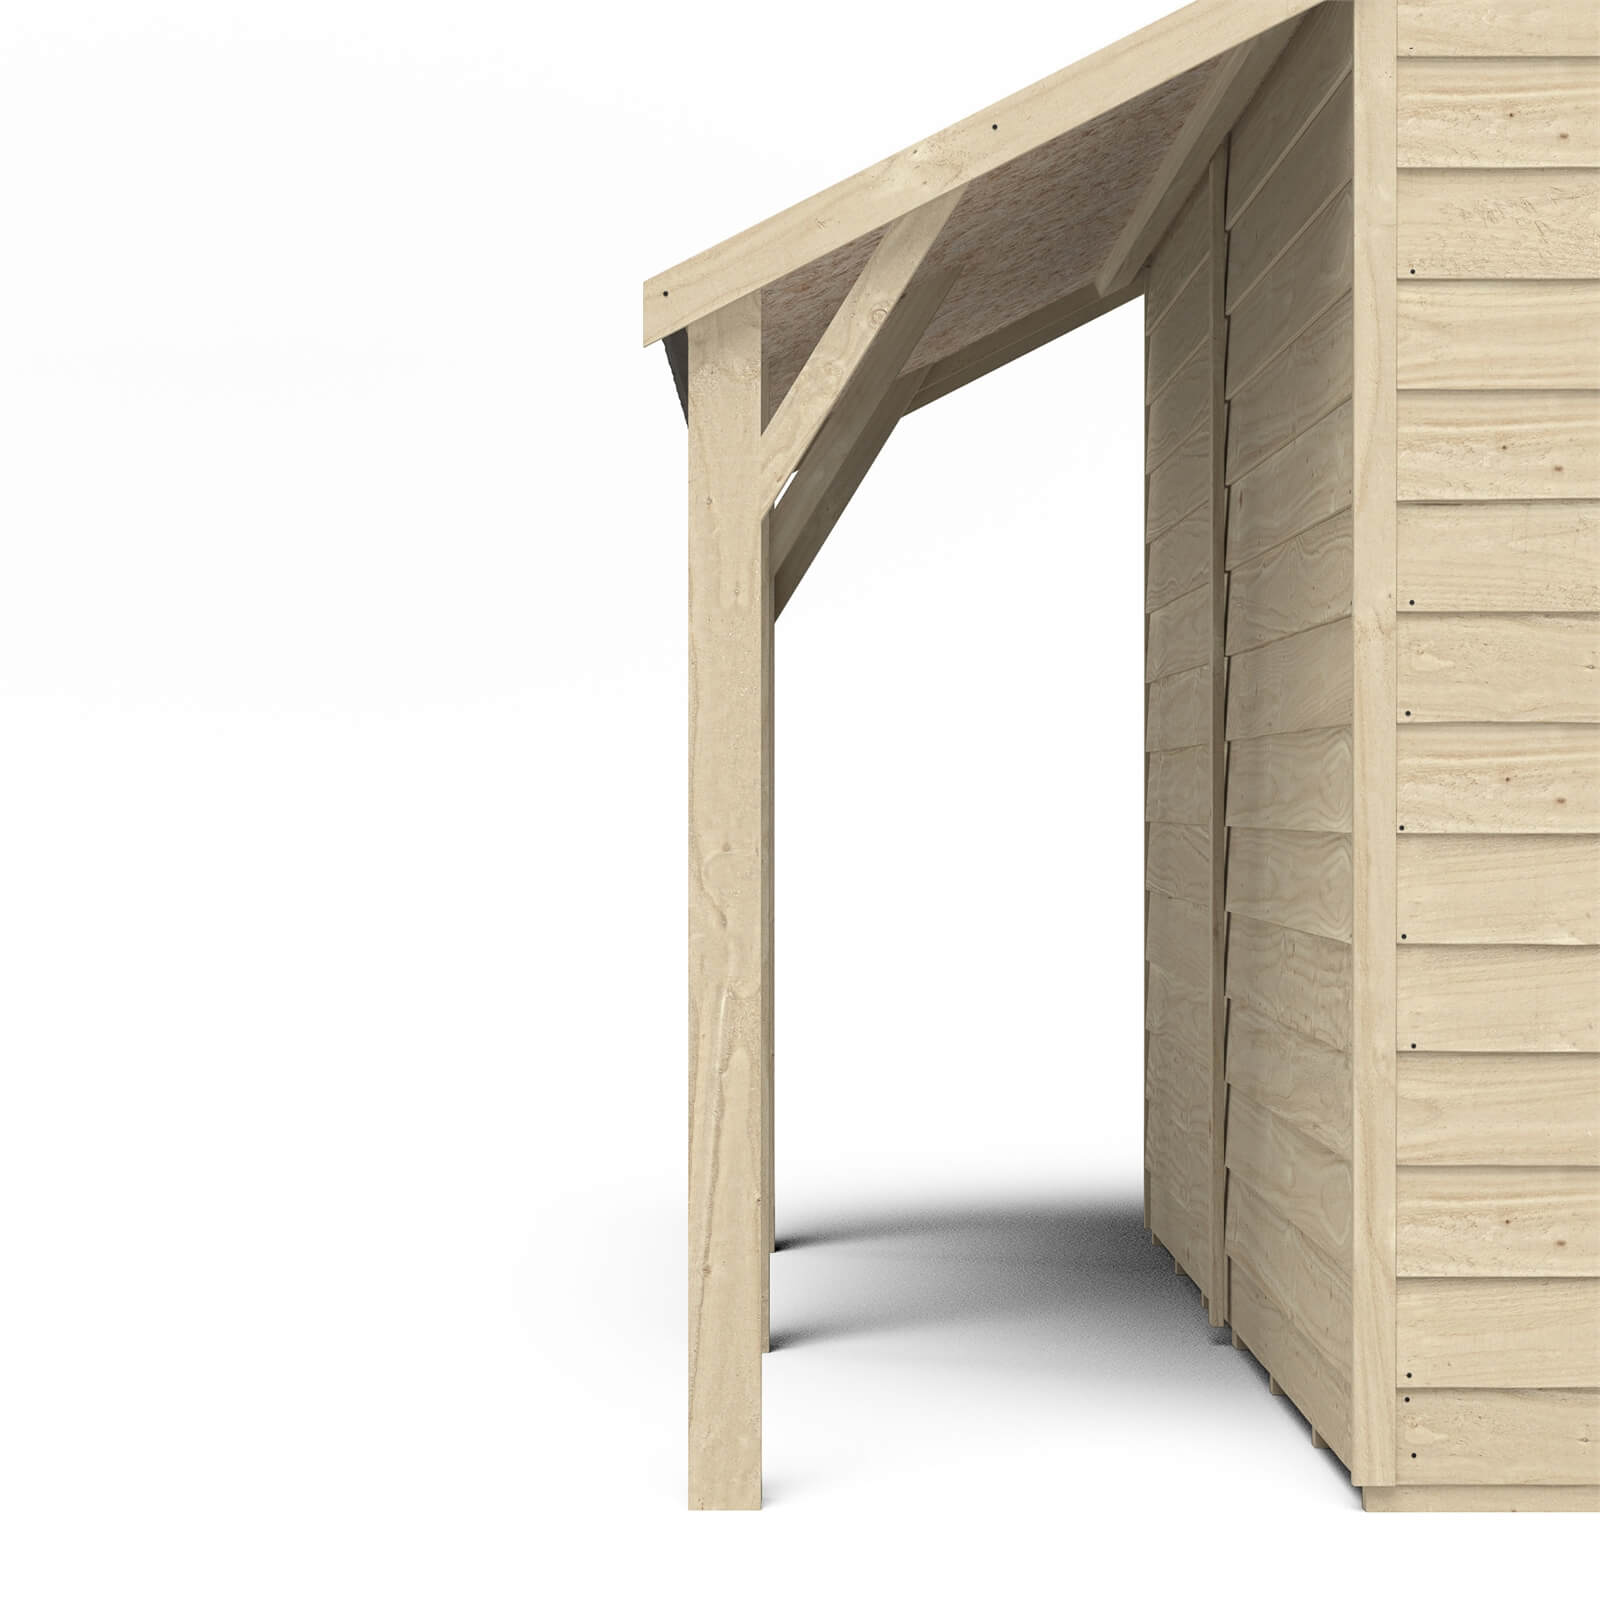 Forest Lean To Shed Kit for 8 x 6ft Overlap Pressure Treated Sheds